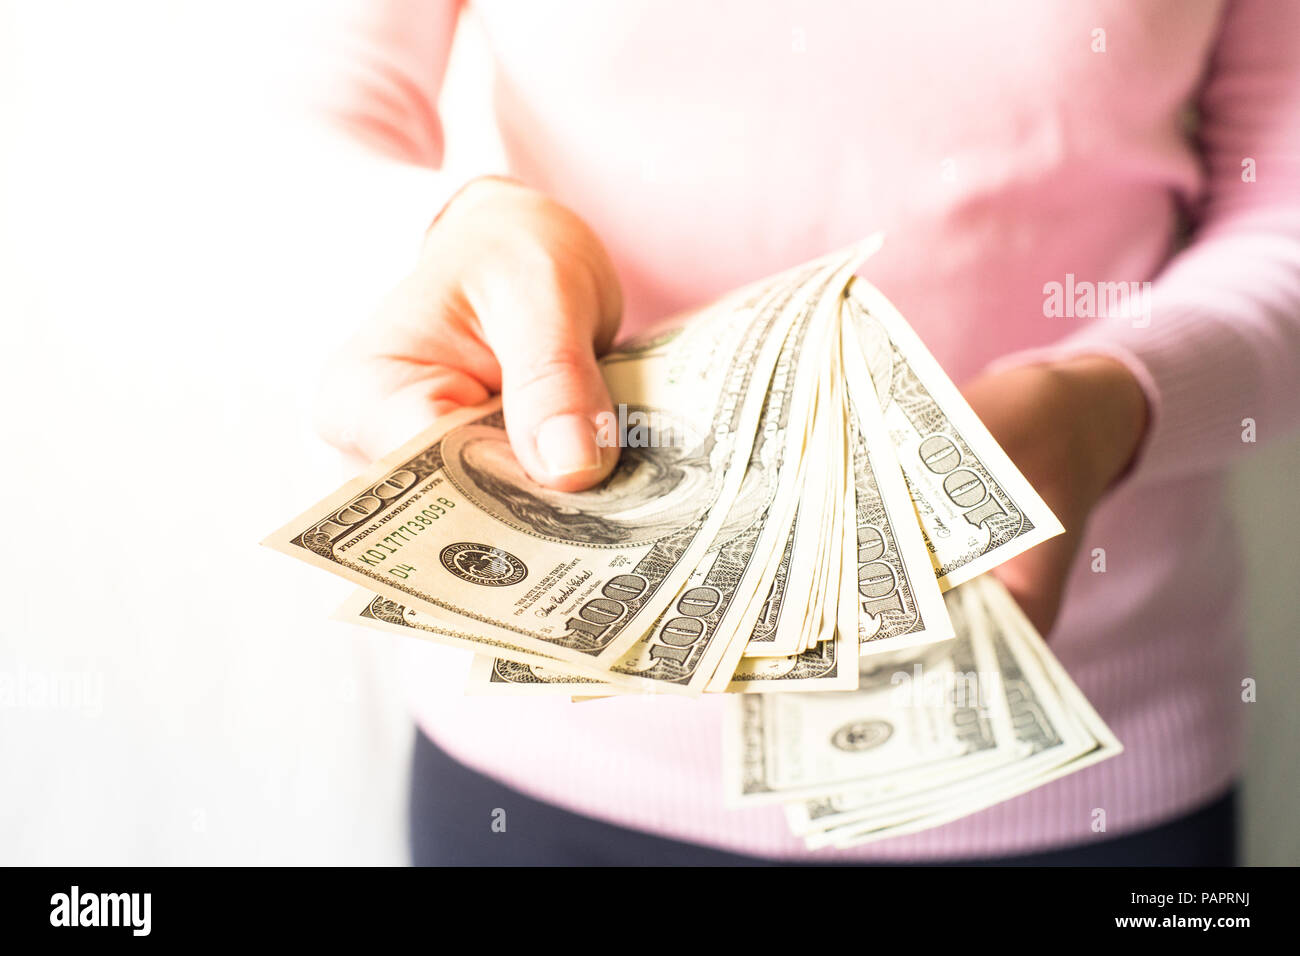 Woman is holding money in her hands. Cash dollar bills. Payment. Stock Photo